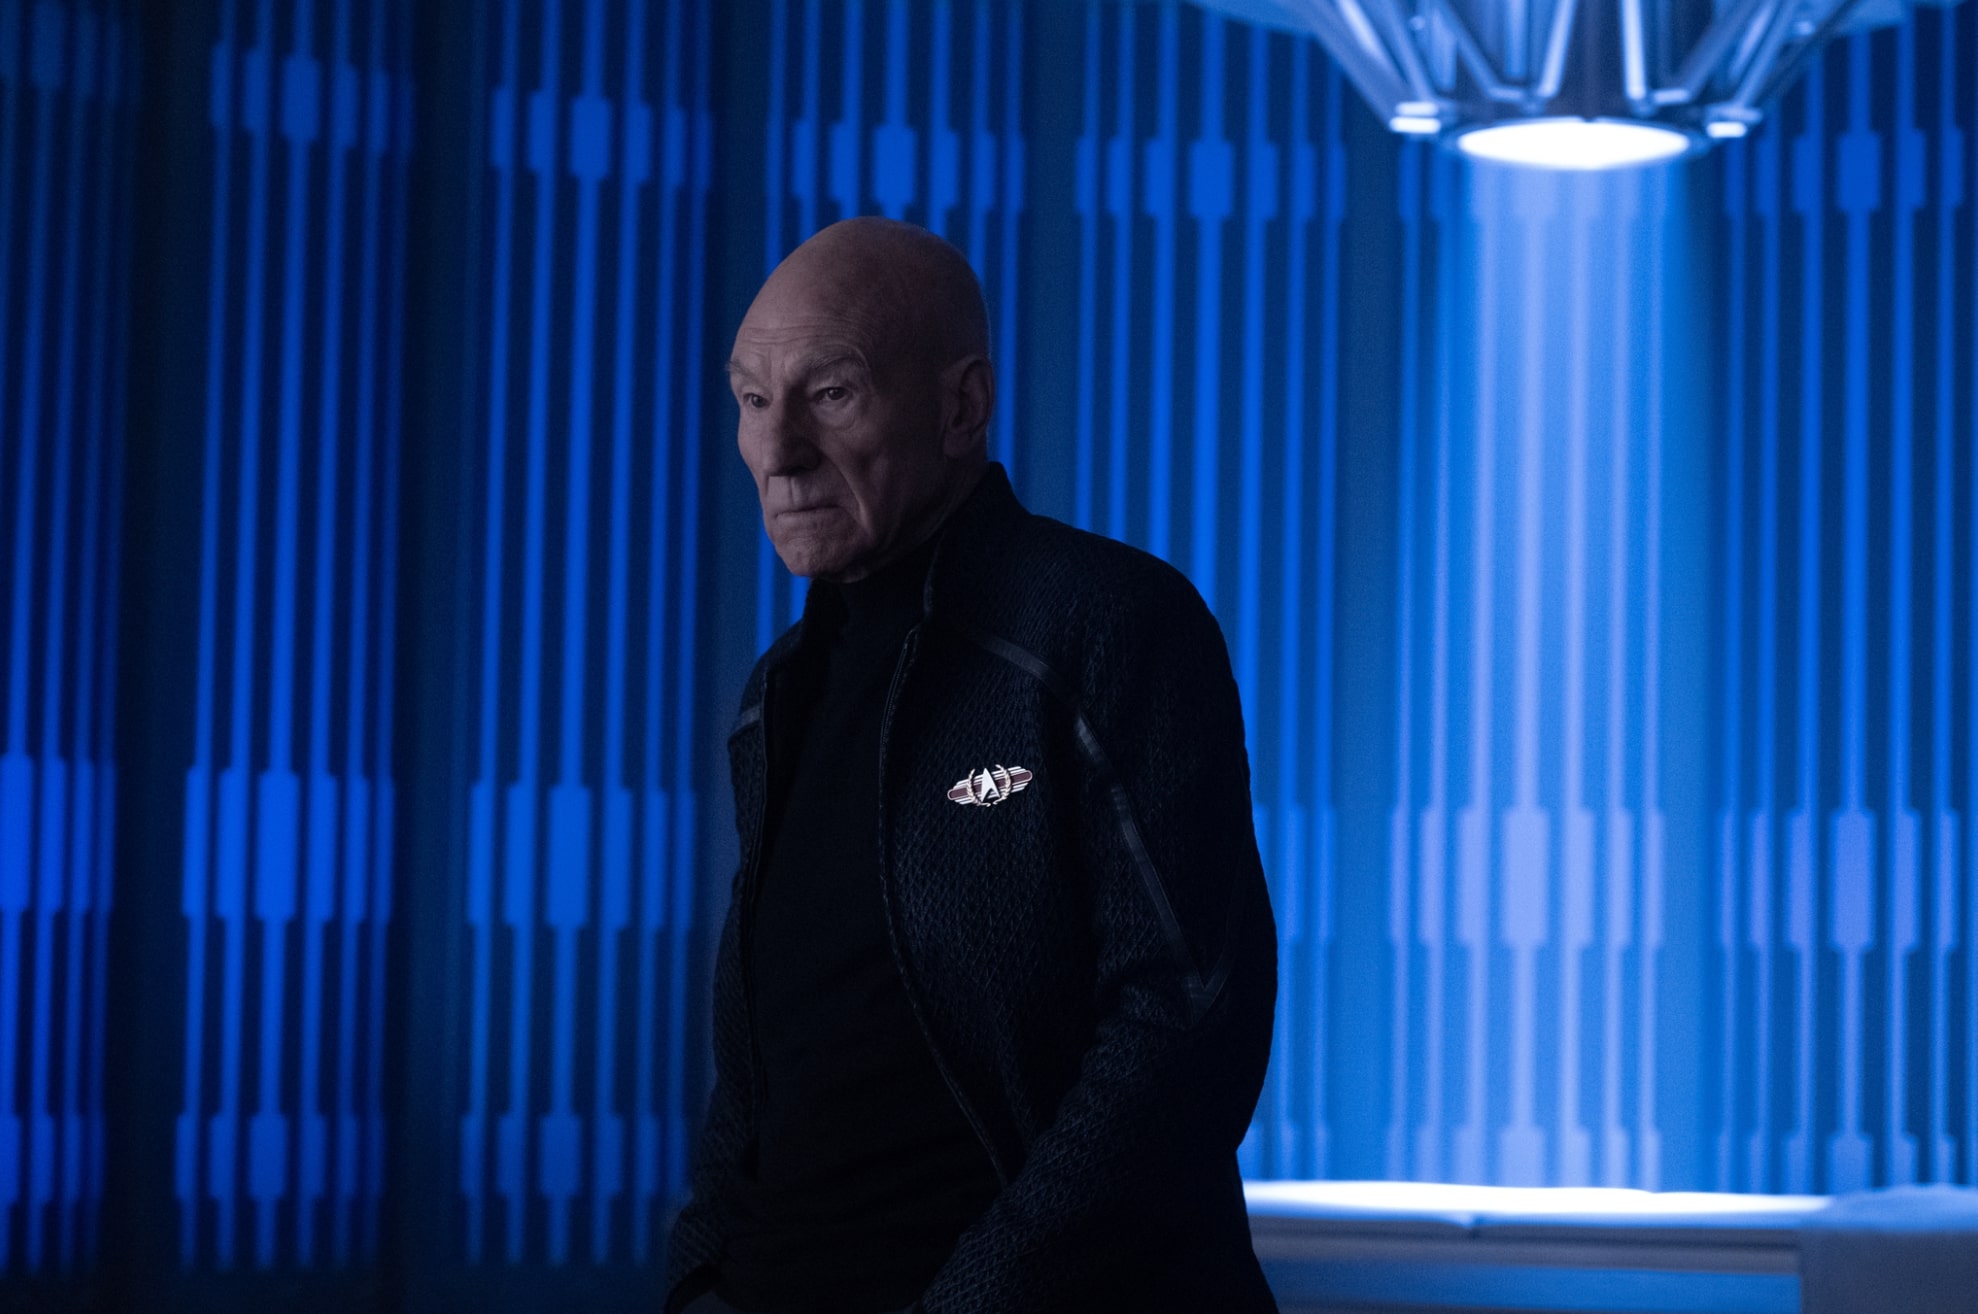 'Picard' S3E9 'Vox' is the reunion we've always wanted from 'Star Trek: The Next Generation'